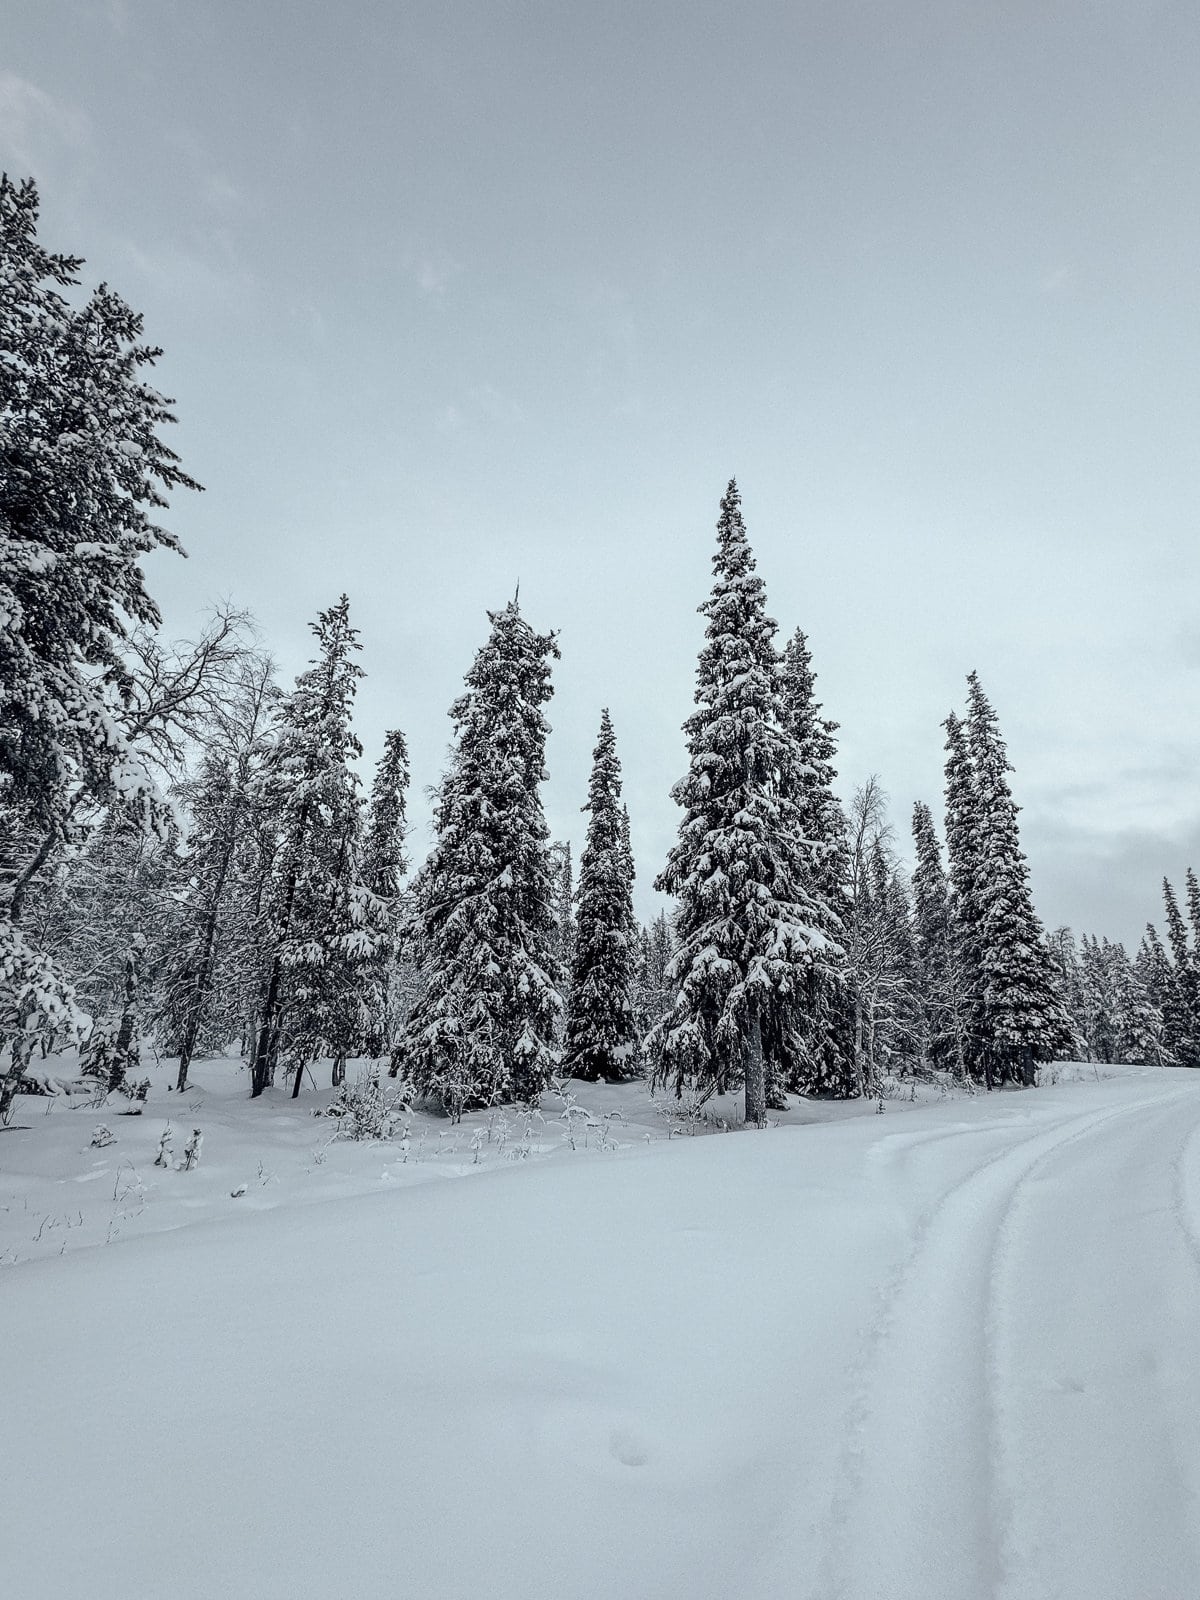 A tranquil winter landscape in Finland, featuring a snow-covered path leading through a forest of tall, snow-laden evergreen trees under a pale blue sky, embodying the serene beauty of the Nordic winter wilderness.